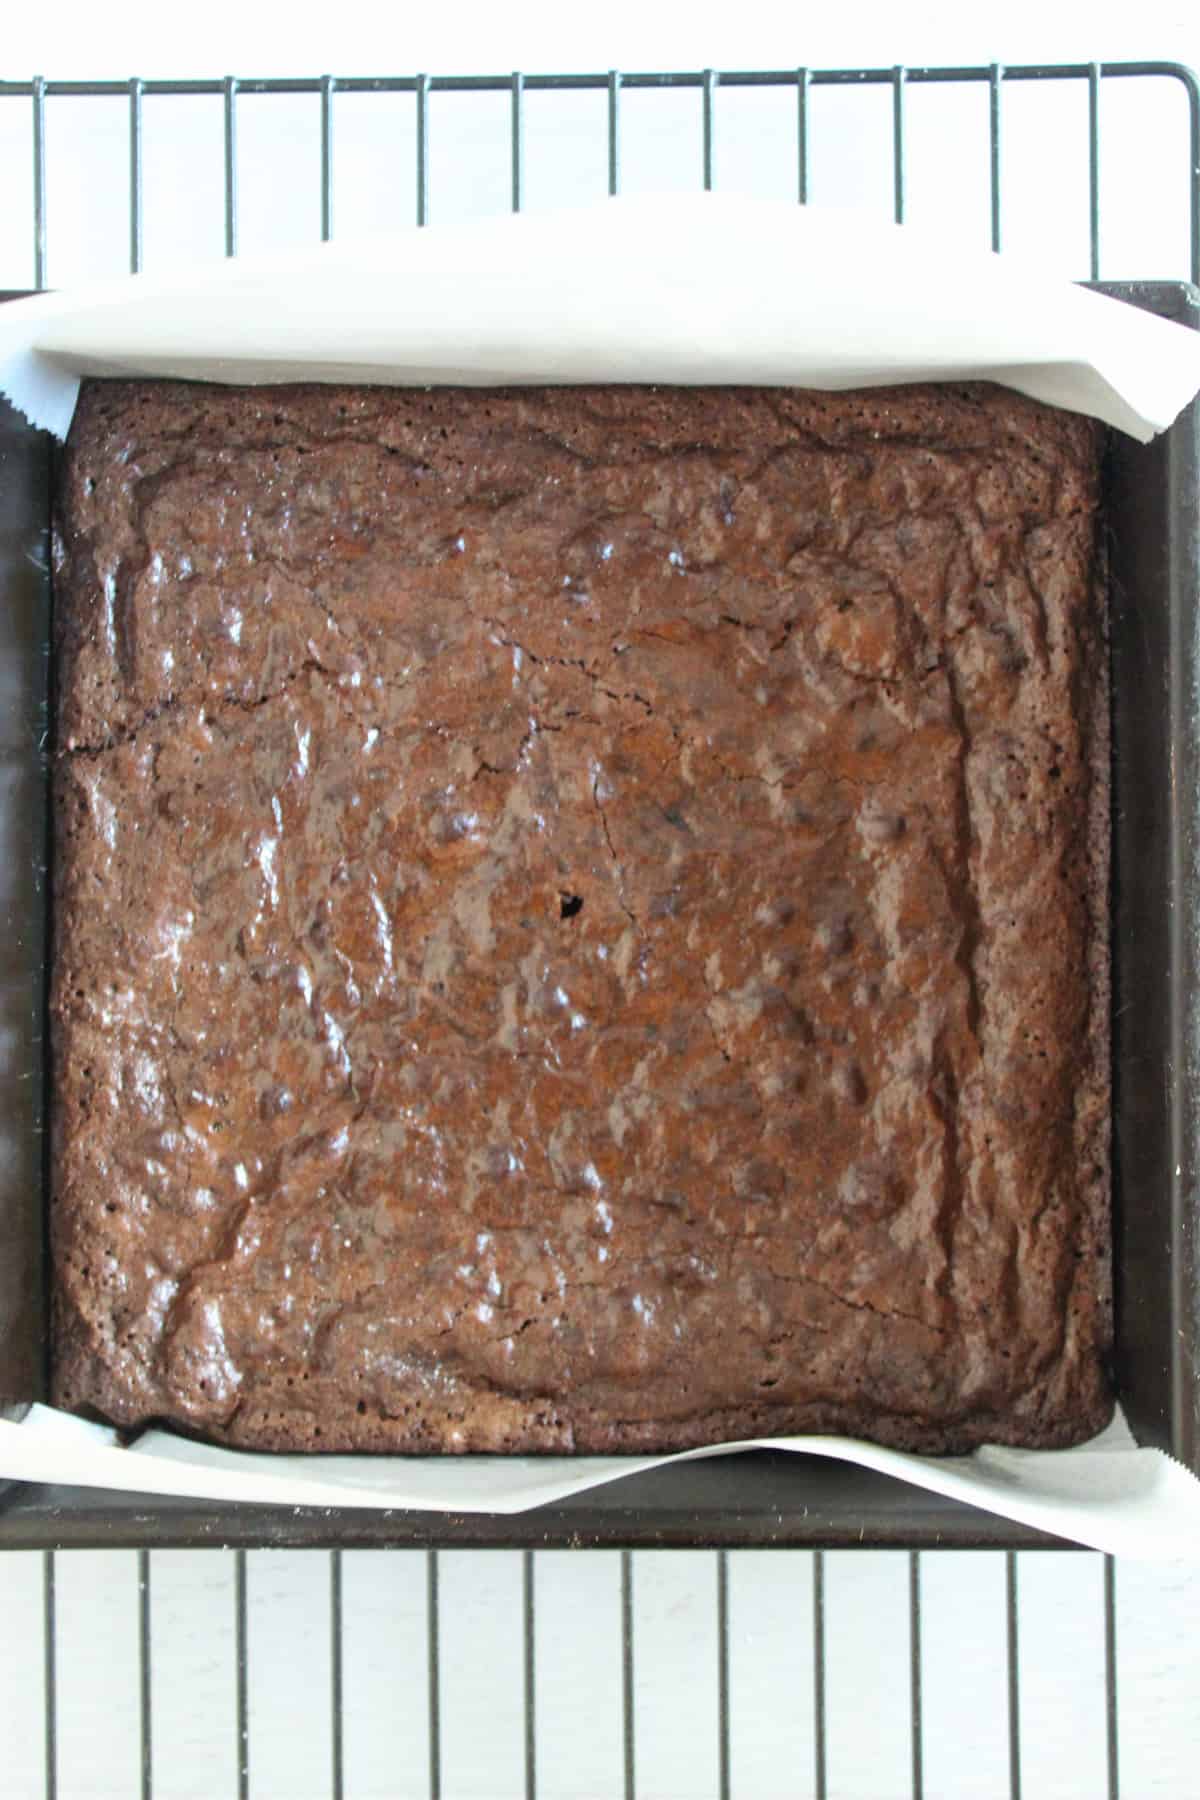 baked brownie in a baking pan.